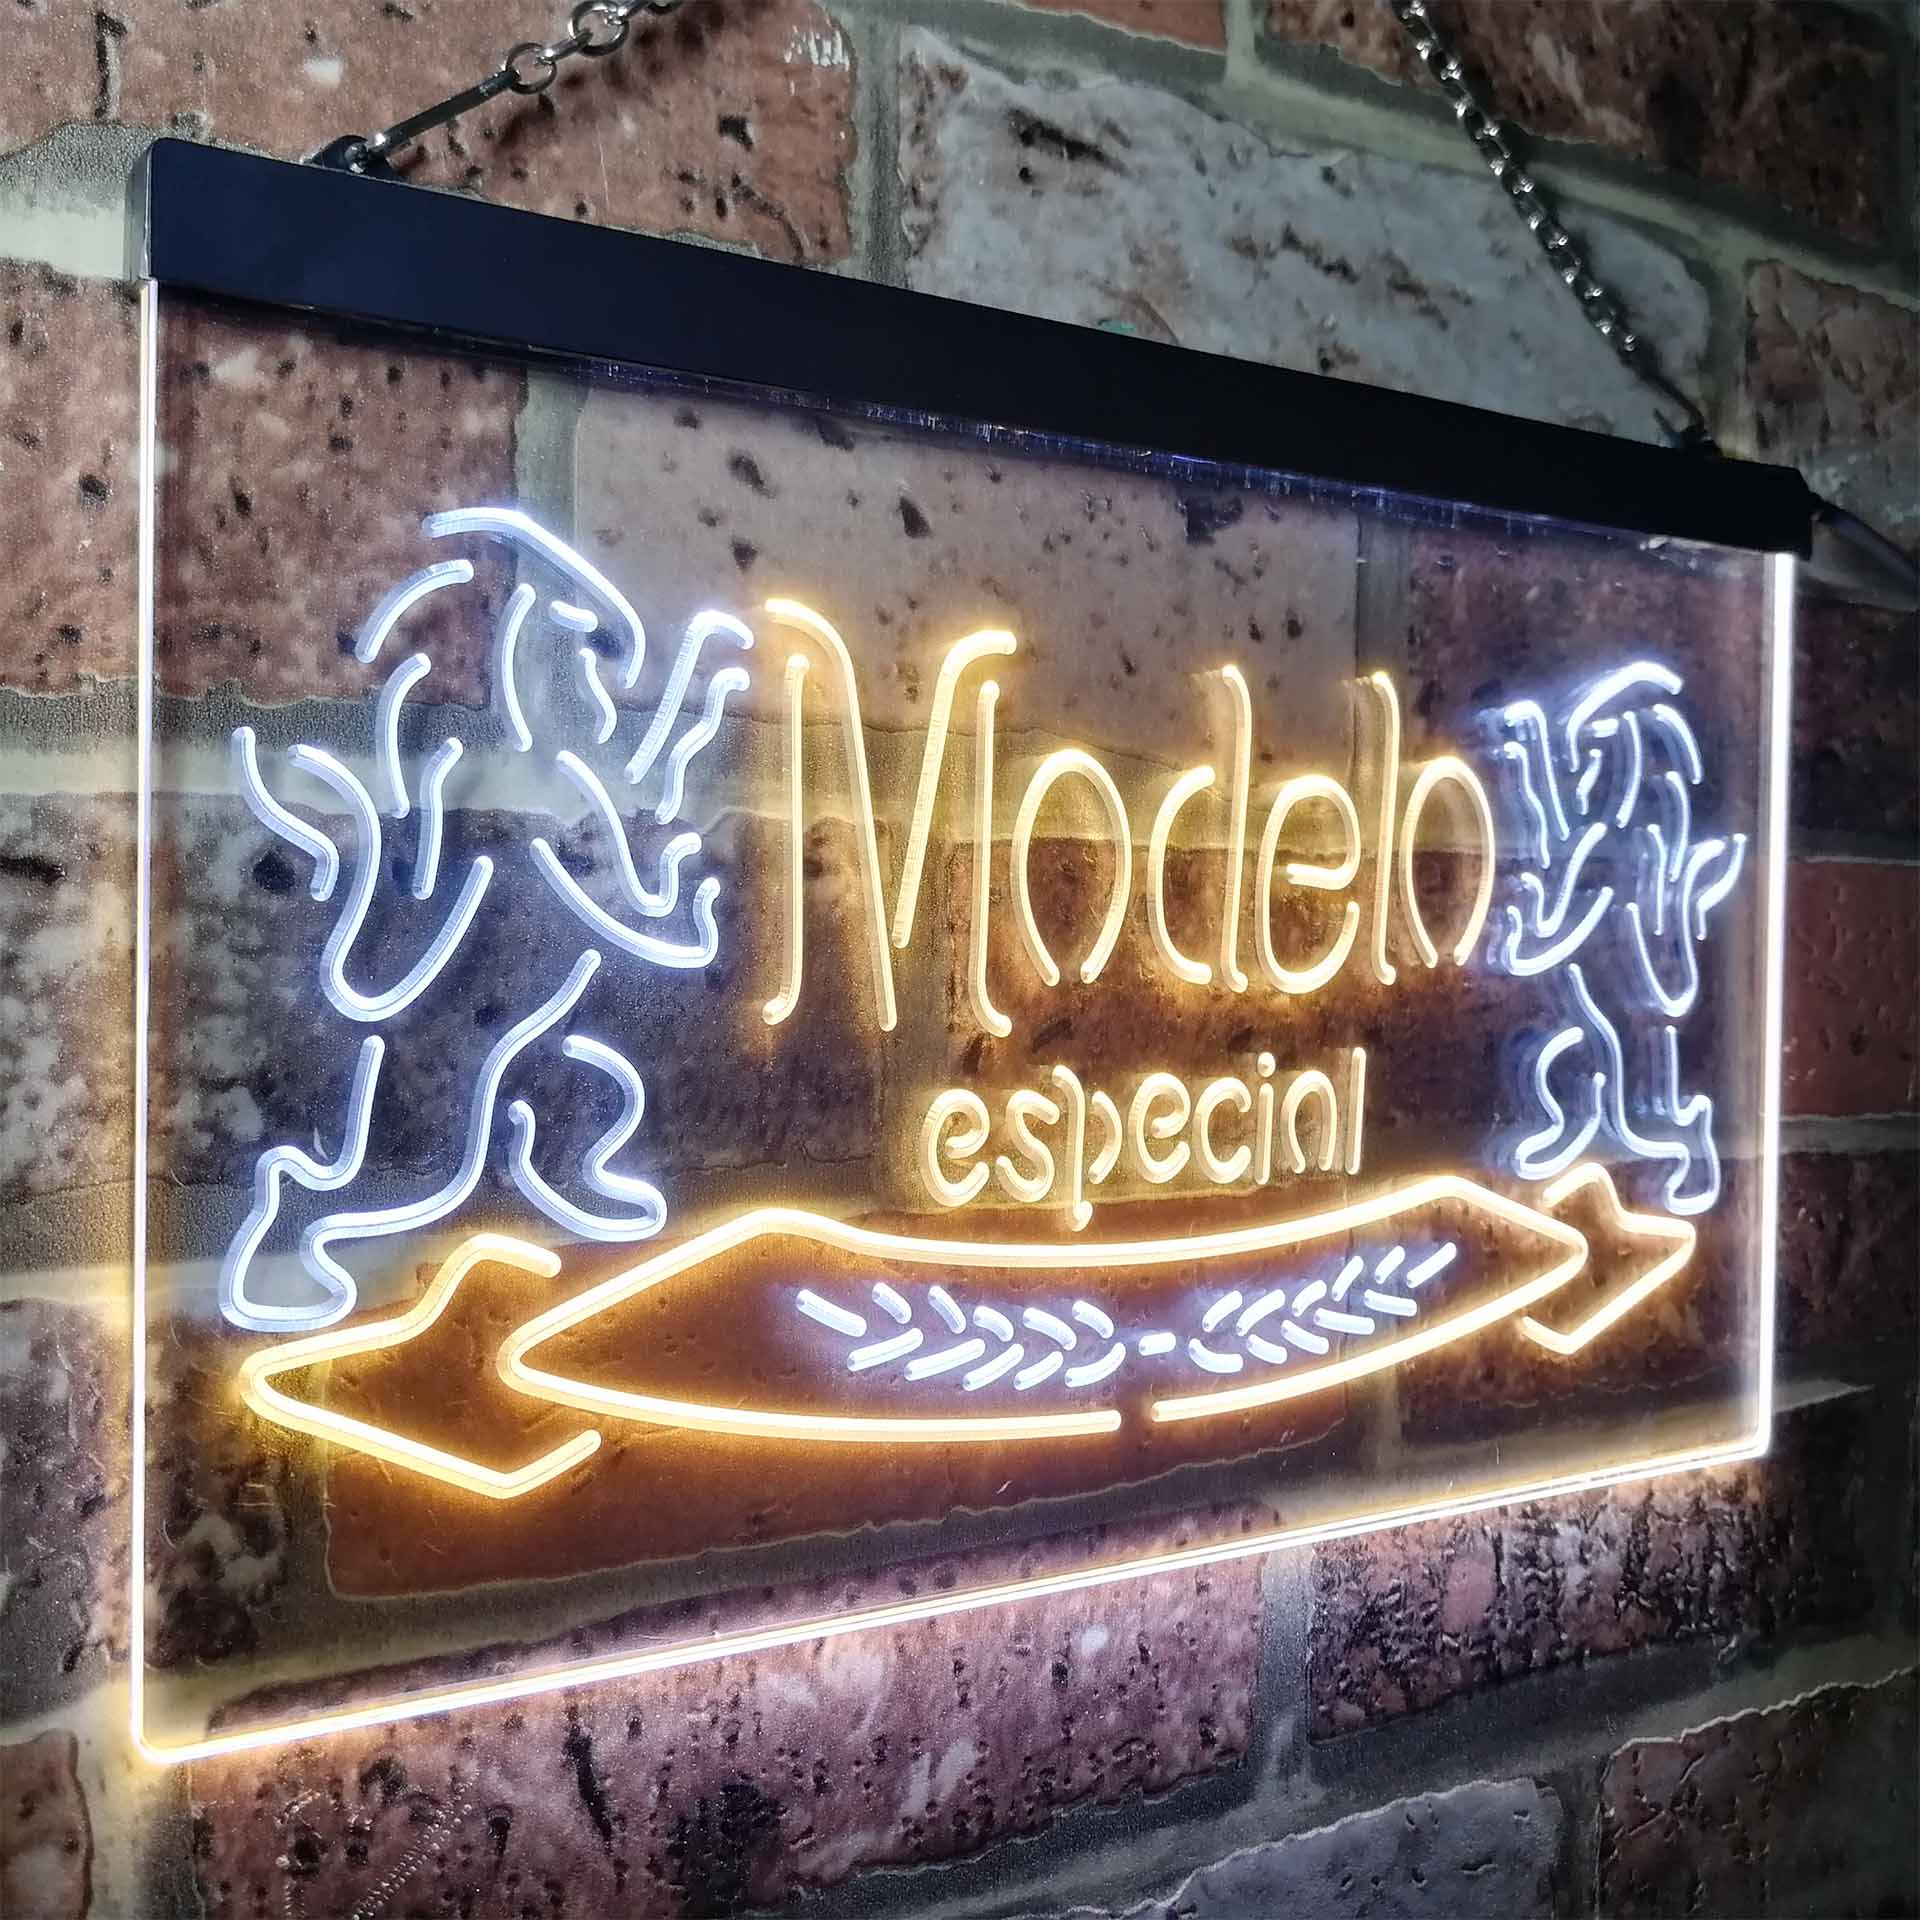 Modelo Especial Beer Neon LED Sign